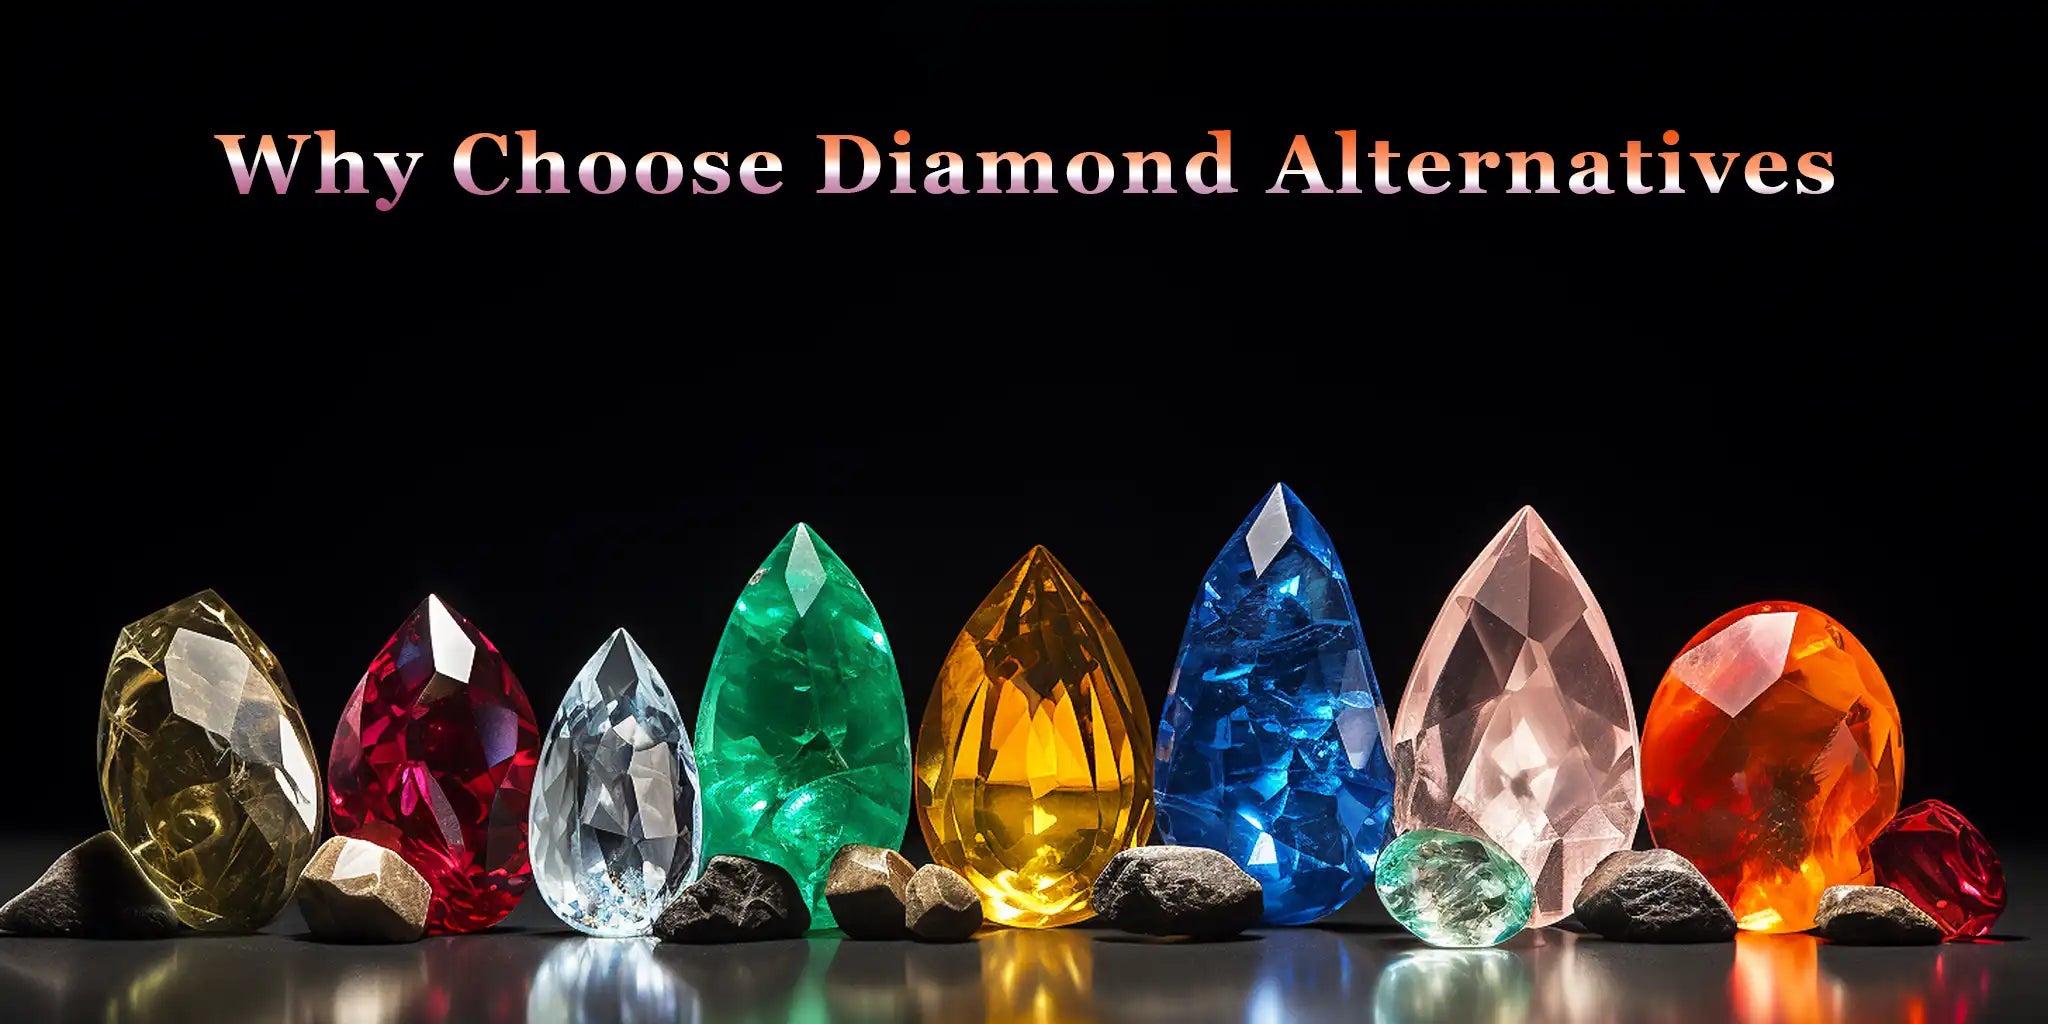 Diamond alternatives stones to know and understand about them